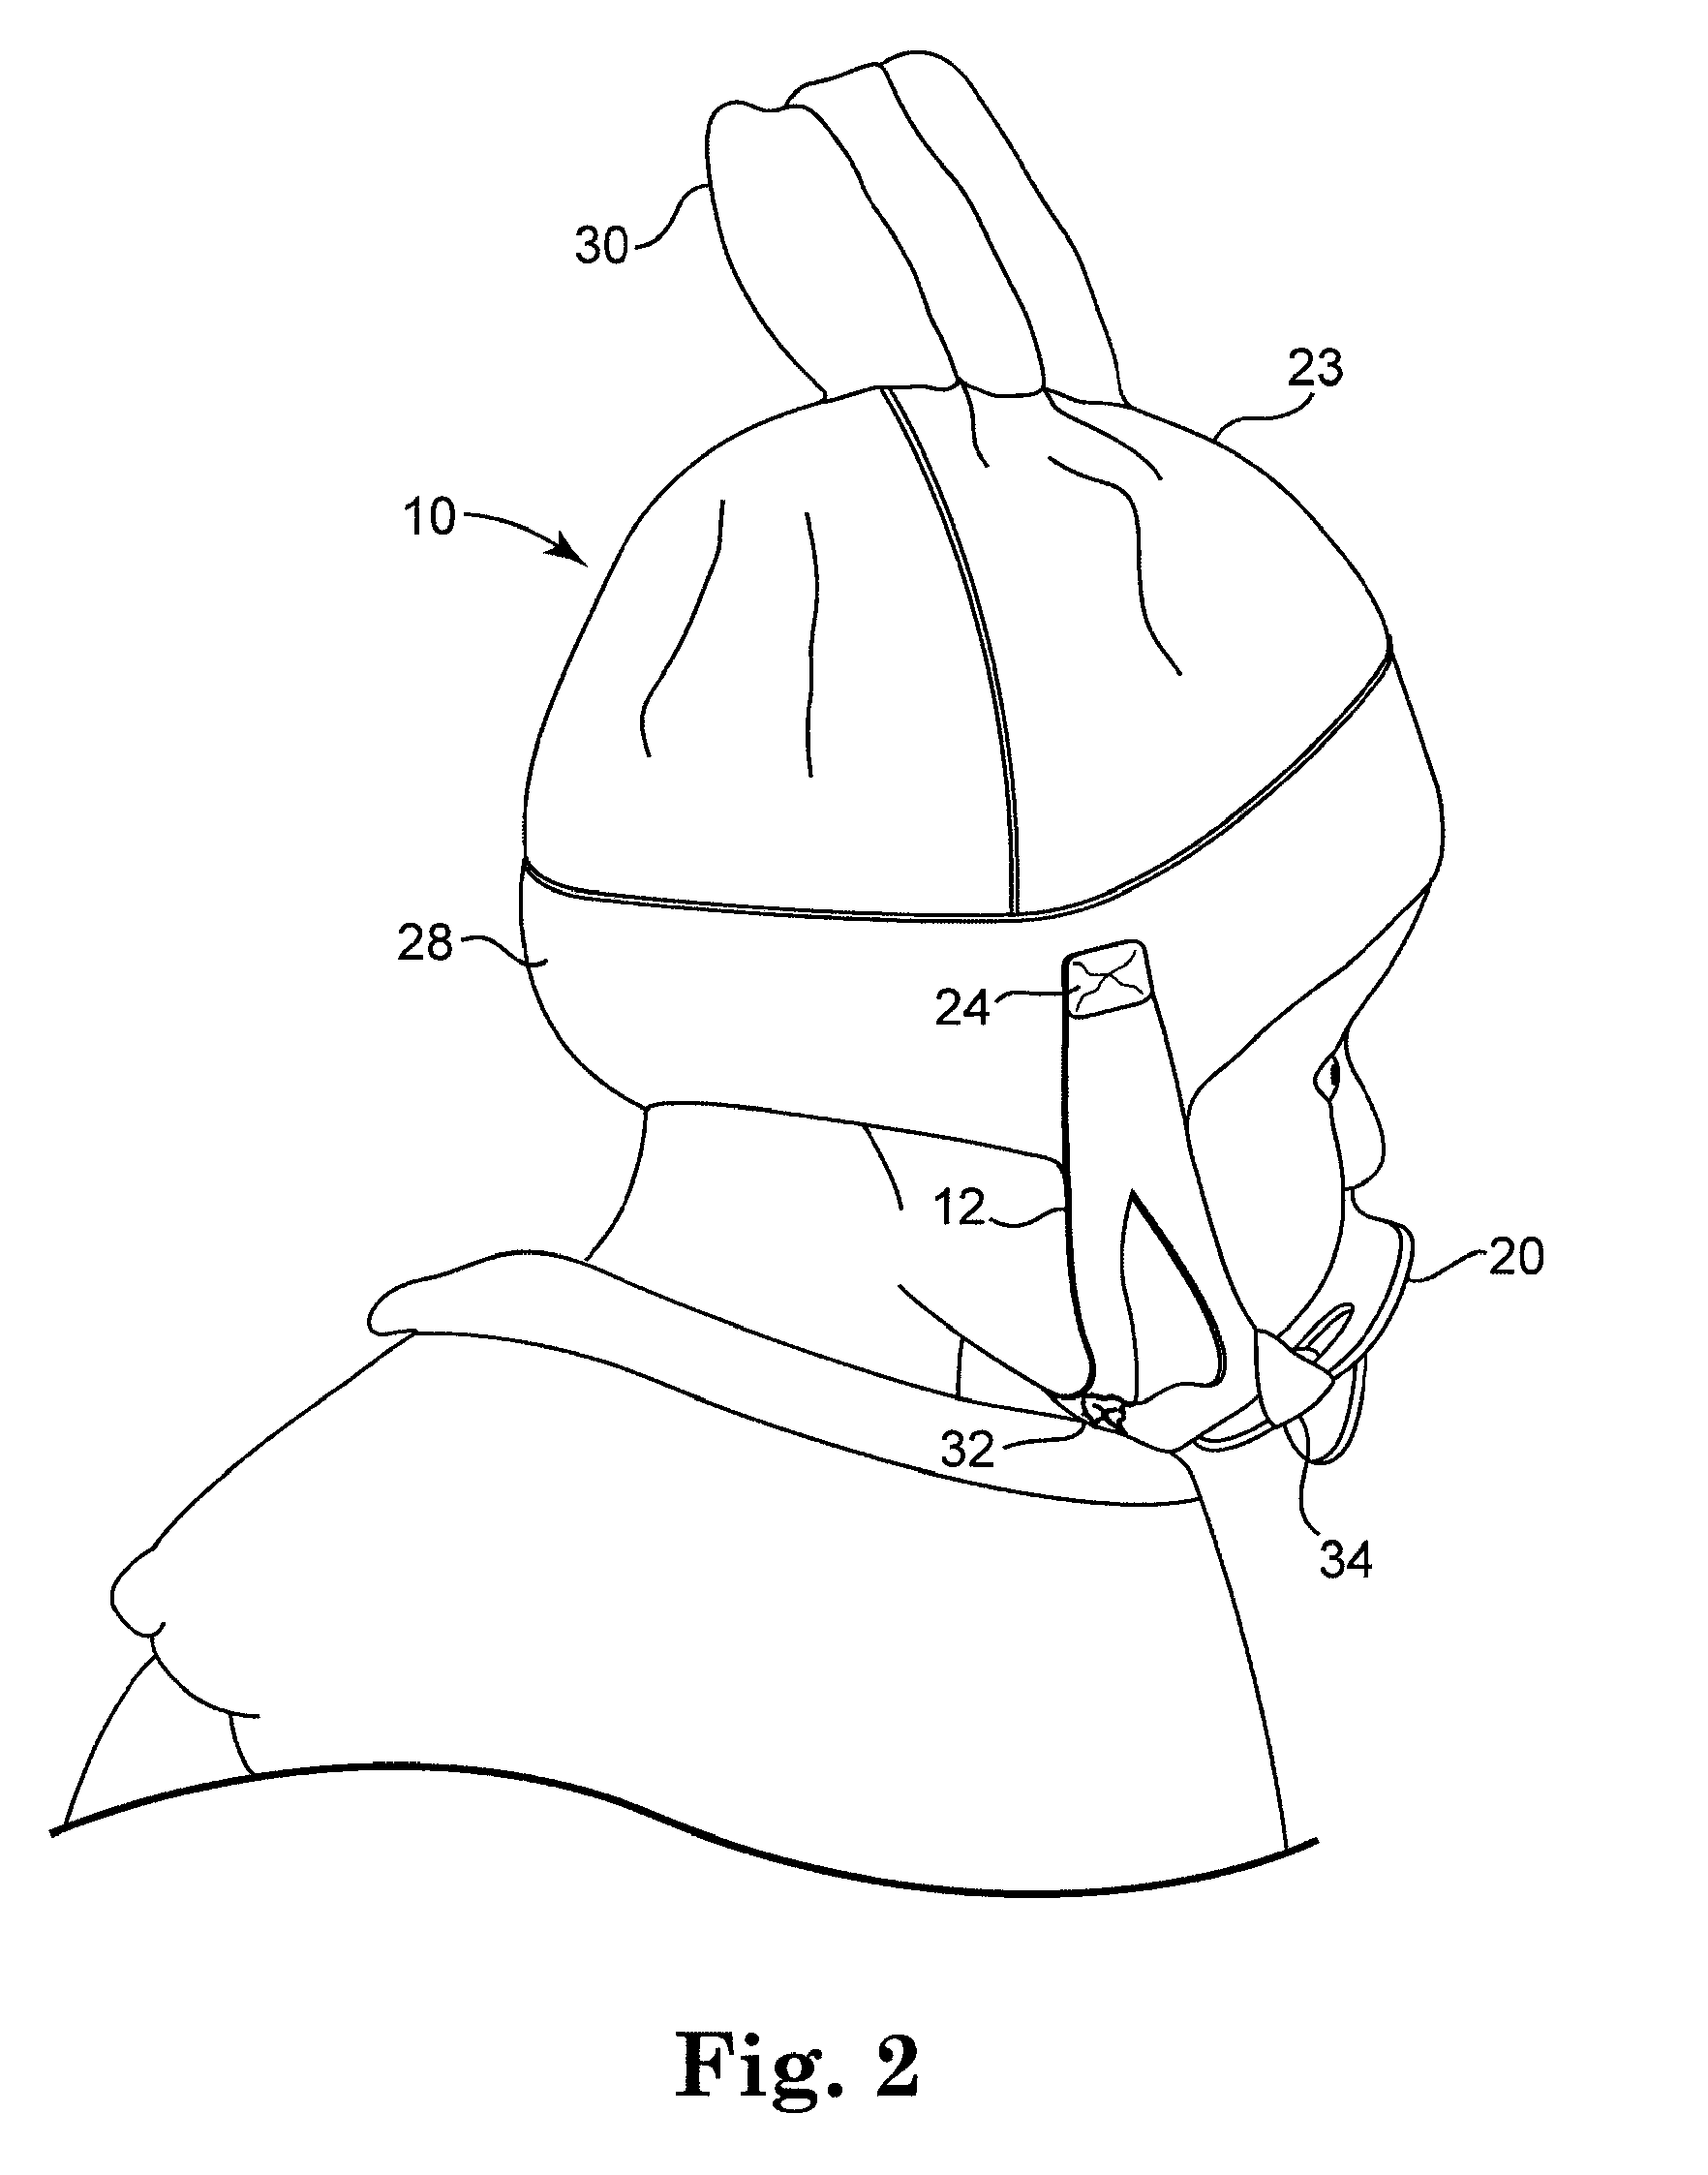 Pacifier securing device